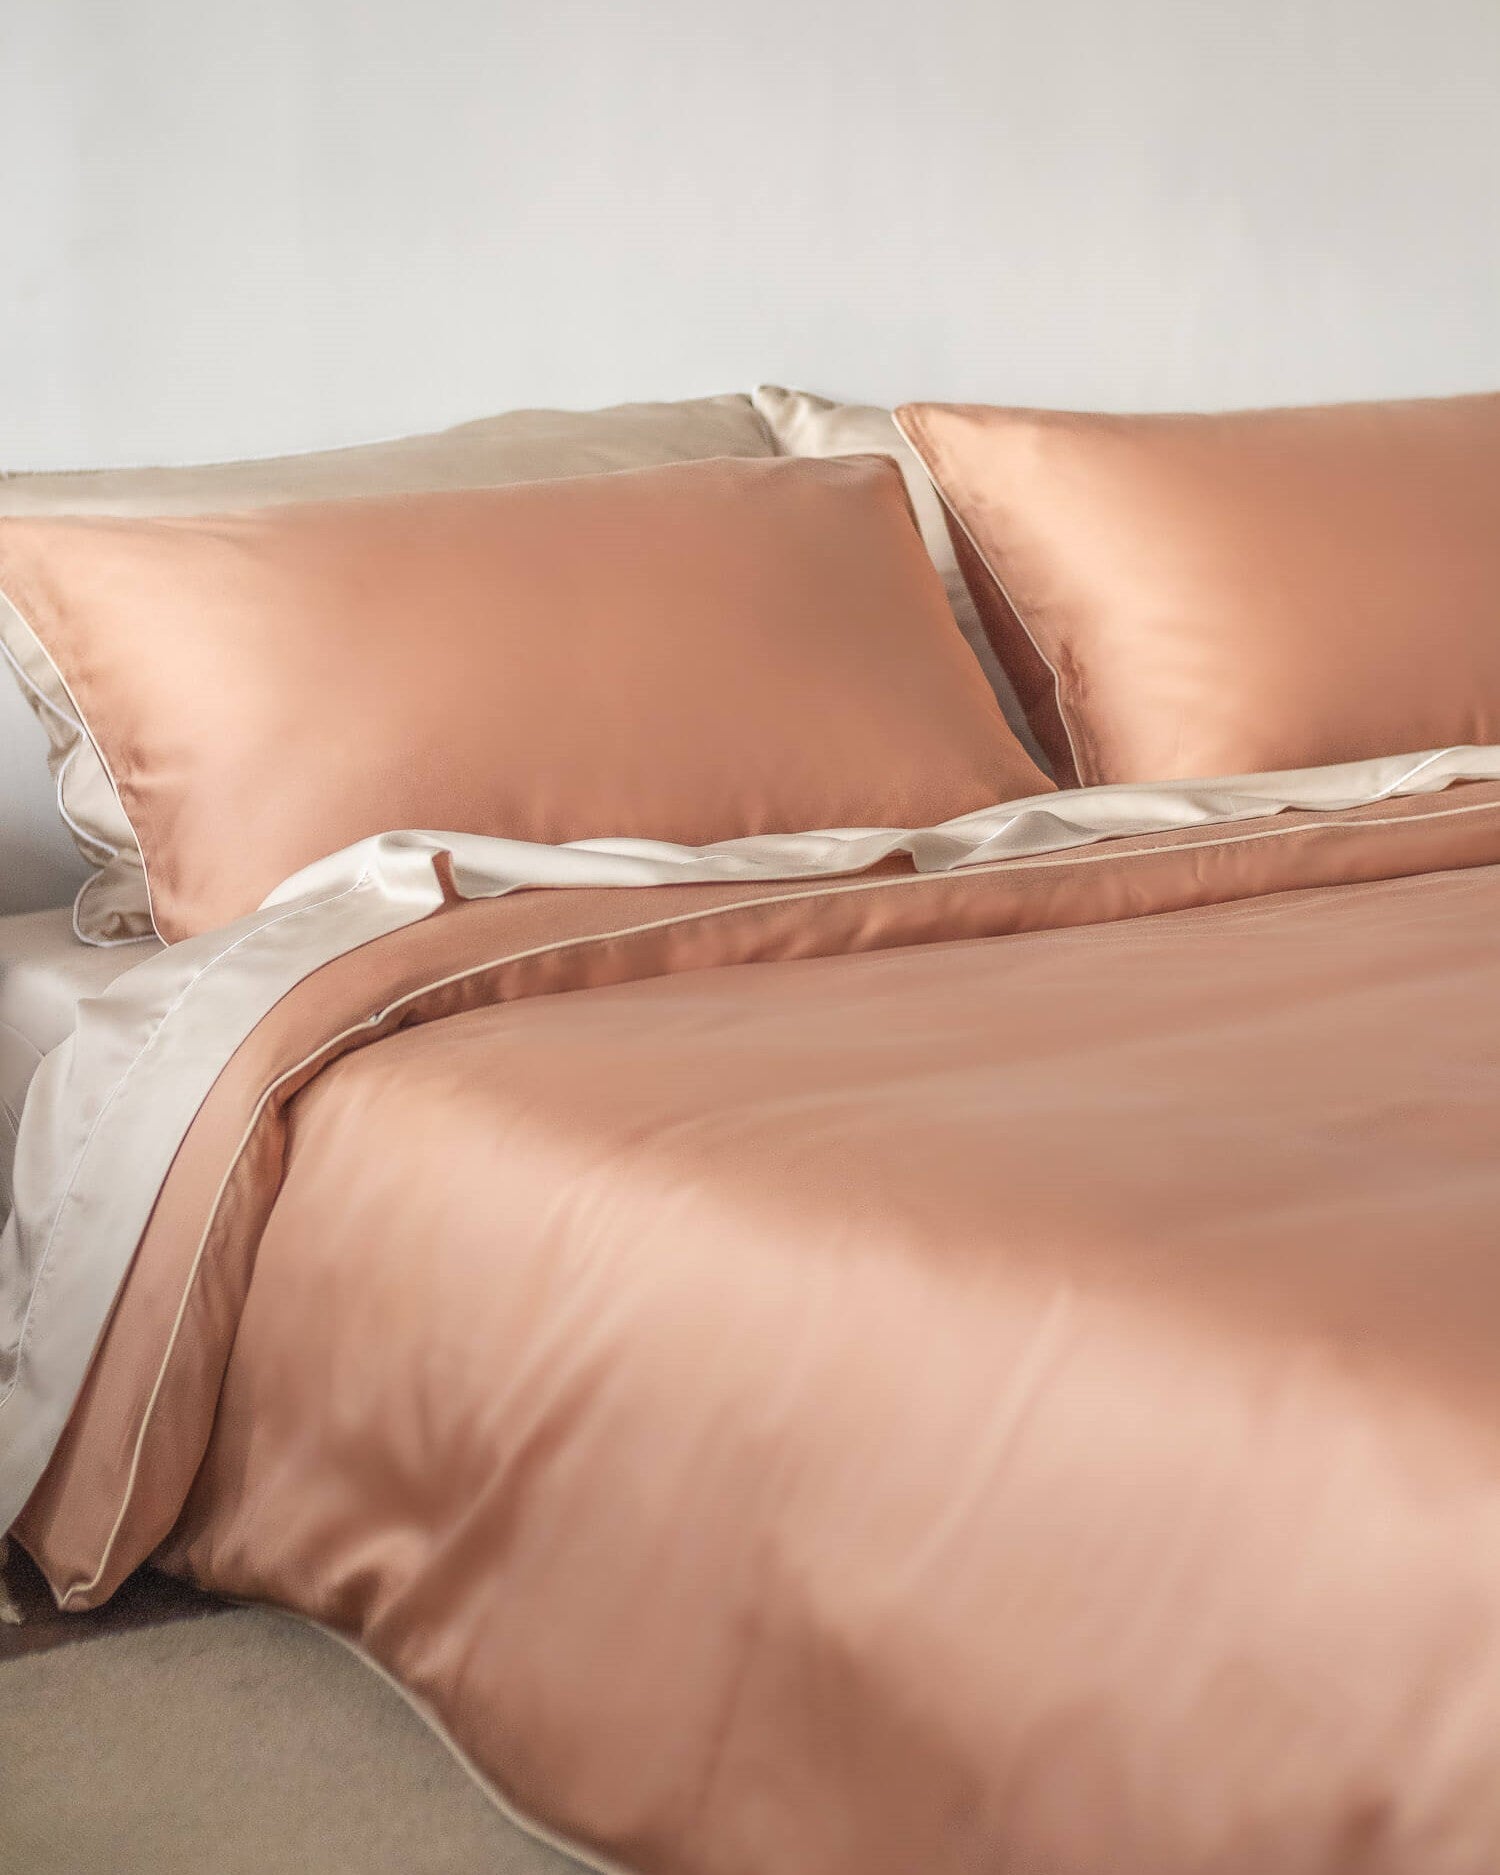 ava and ava ph organic bamboo lyocell duvet cover and pillowcases (autumn caramel ochre), flat sheet (sand beige). soft and cooling bedding sheets.